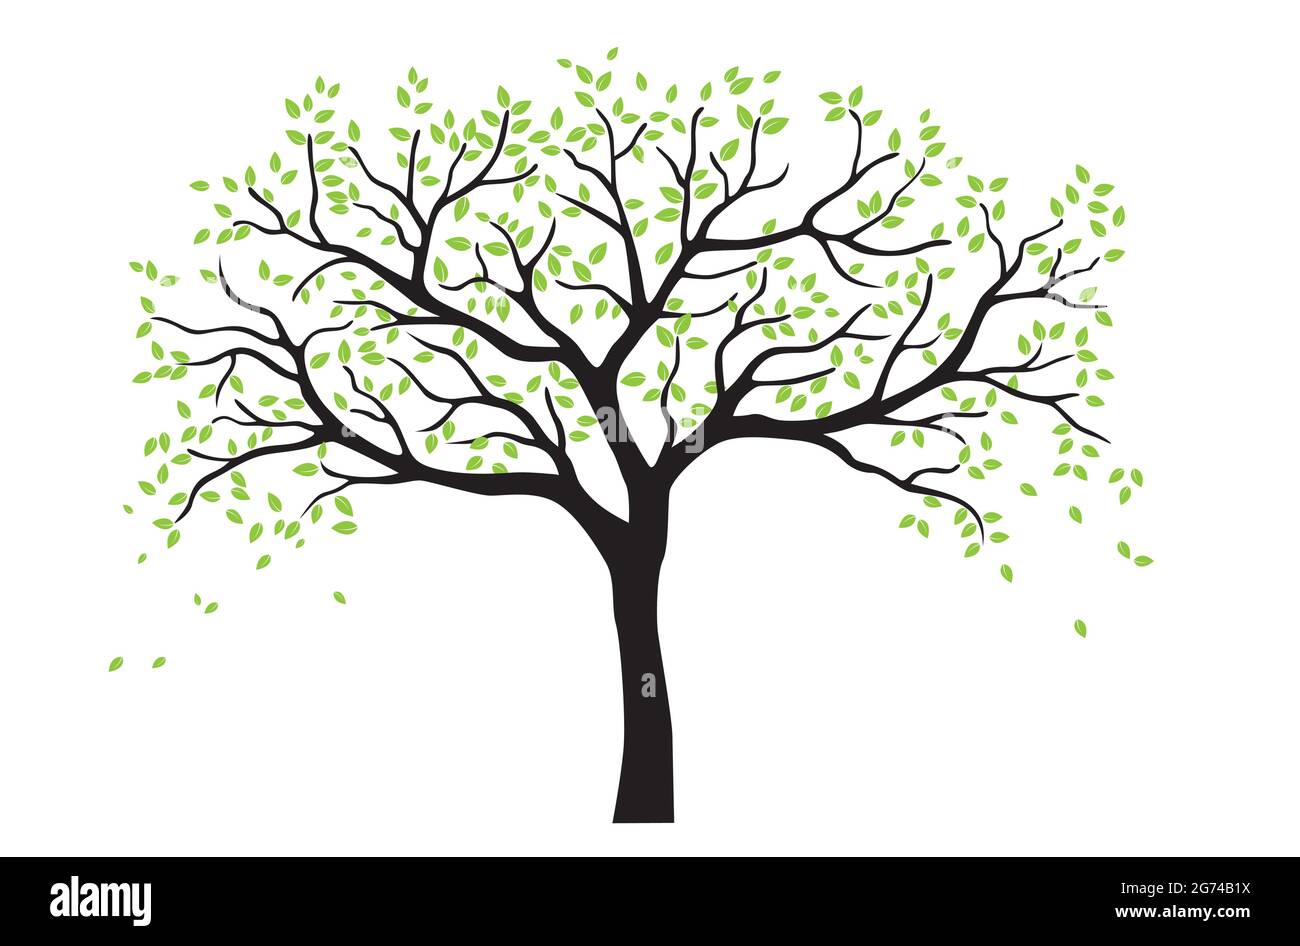 Beautiful tree branch silhouette background for wallpaper Stock Vector